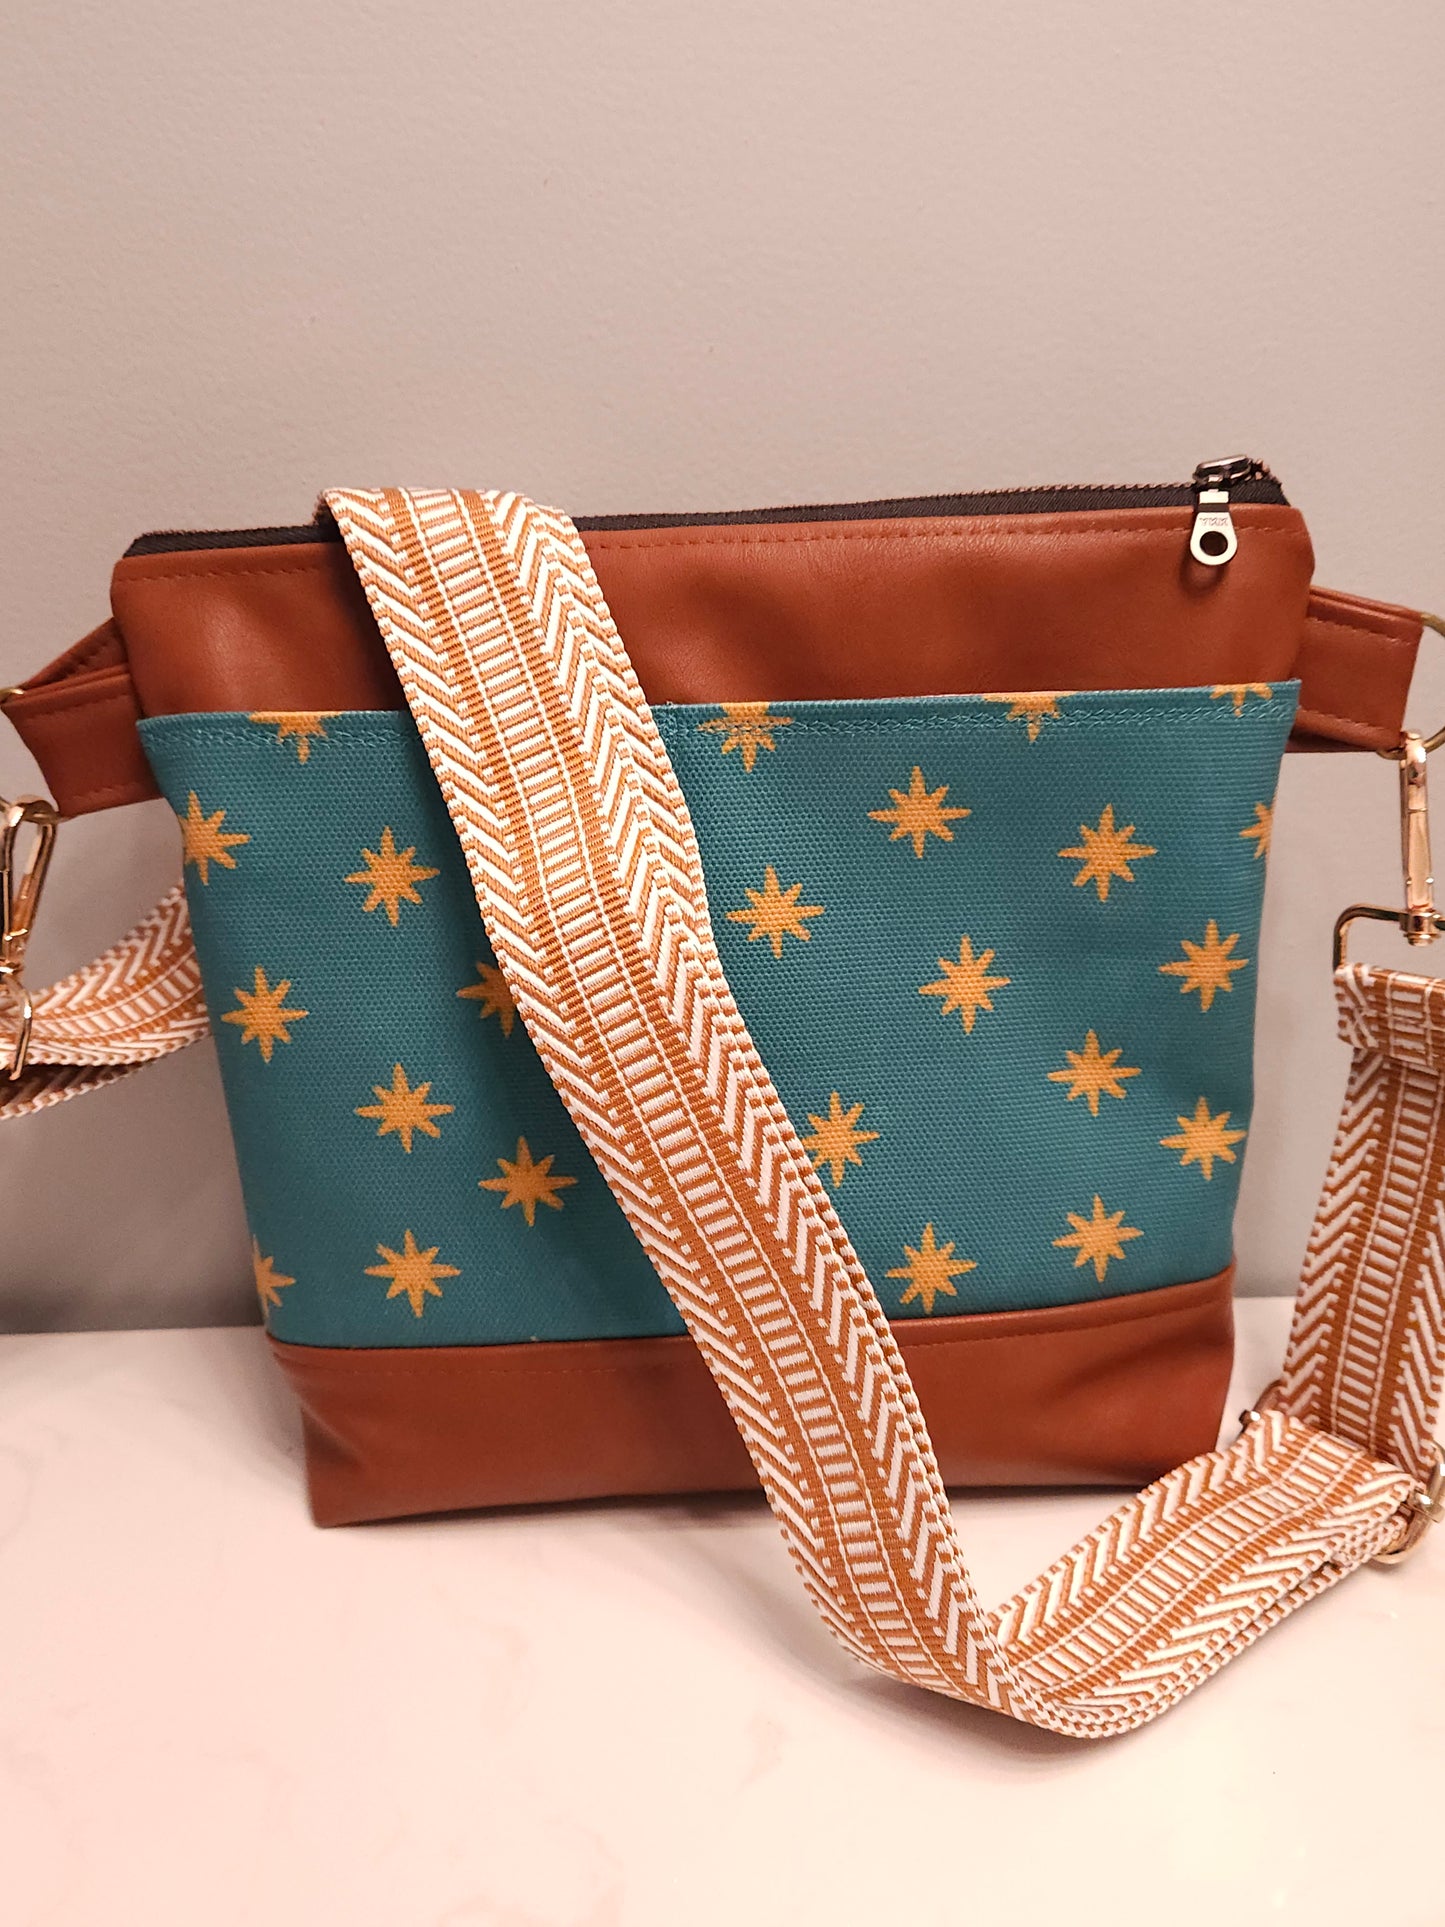 Catholic crossbody with exterior slip pockets in the Melissa Collection